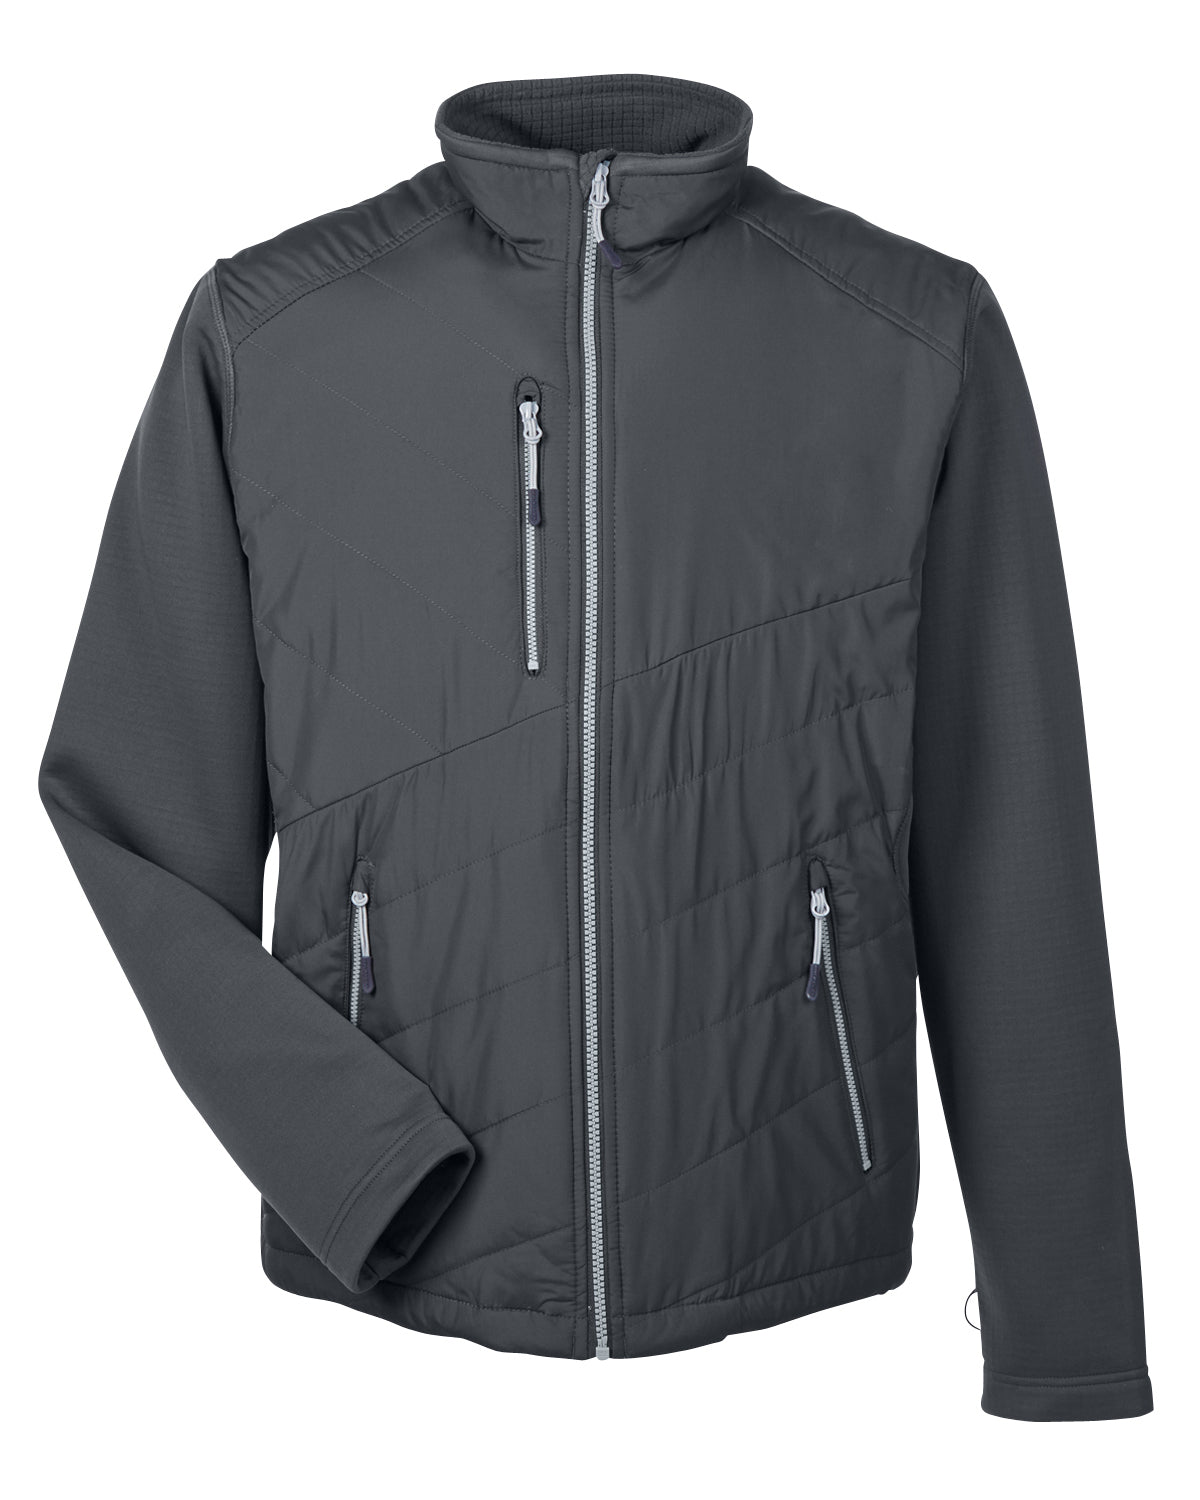 NORTH END MEN'S MICRO PLUS WINDSHIRT WITH TEFLON - ID Apparel